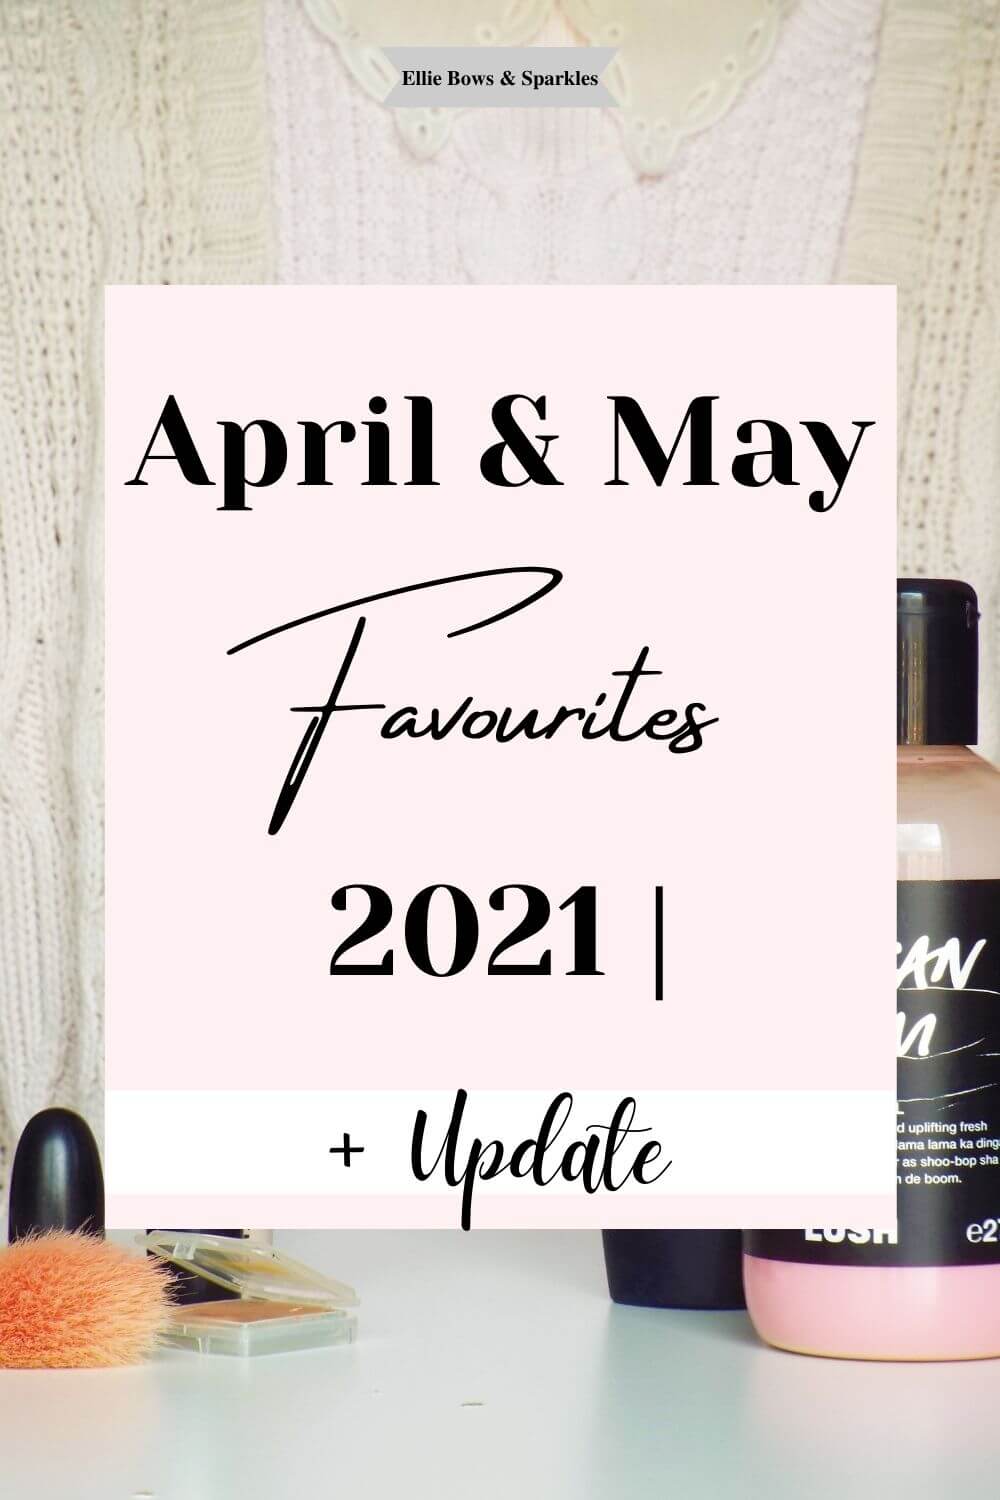 Pinterest pin with large pink box reading "April & May Favourites 2021 + Update", with white stripe accent behind the text "+ update". Collection of April and May Favourites fills background.